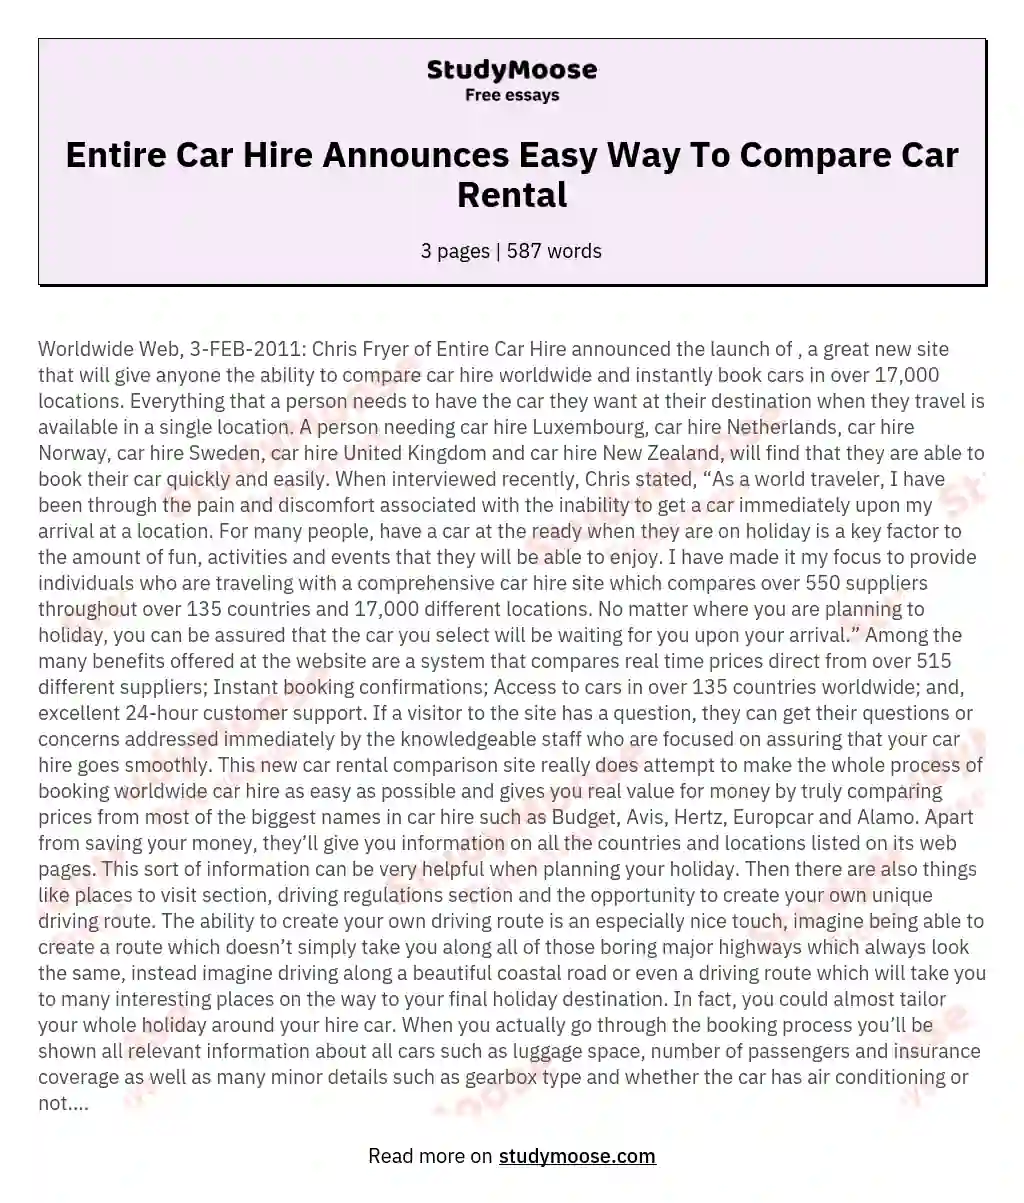 Entire Car Hire Announces Easy Way To Compare Car Rental